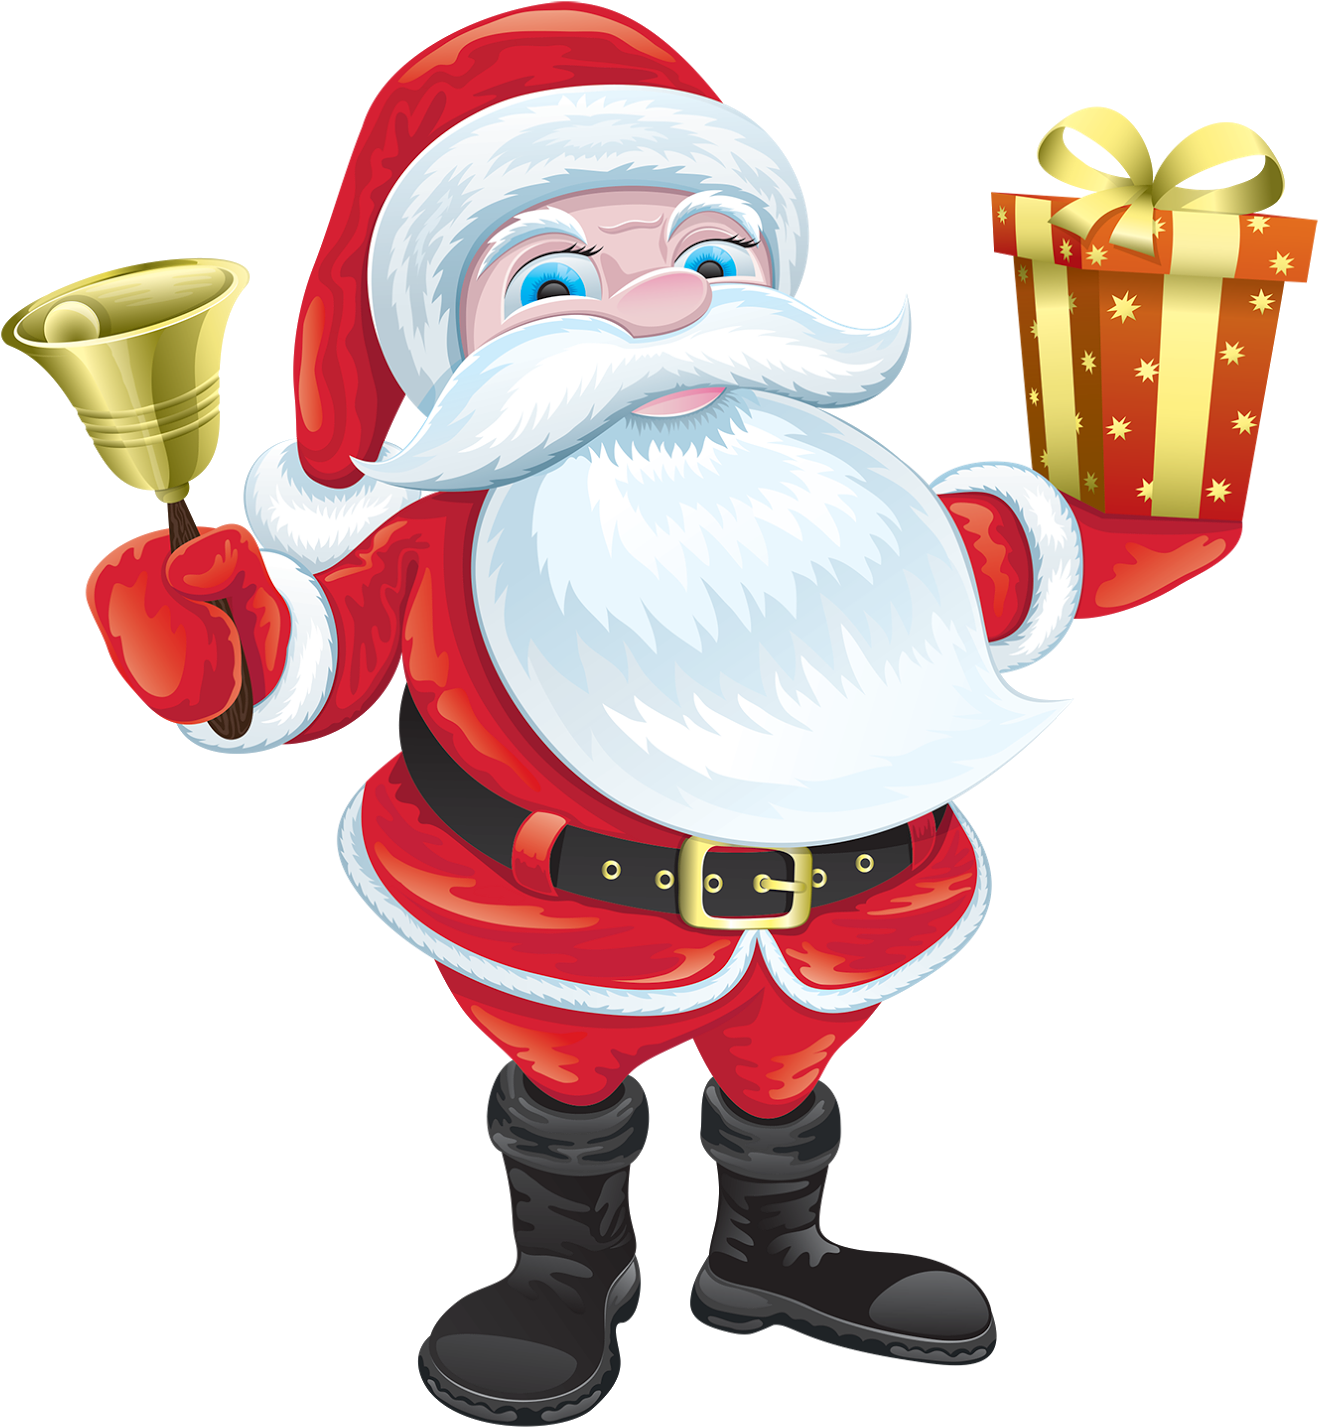 A Cartoon Of Santa Claus Holding A Bell And A Present